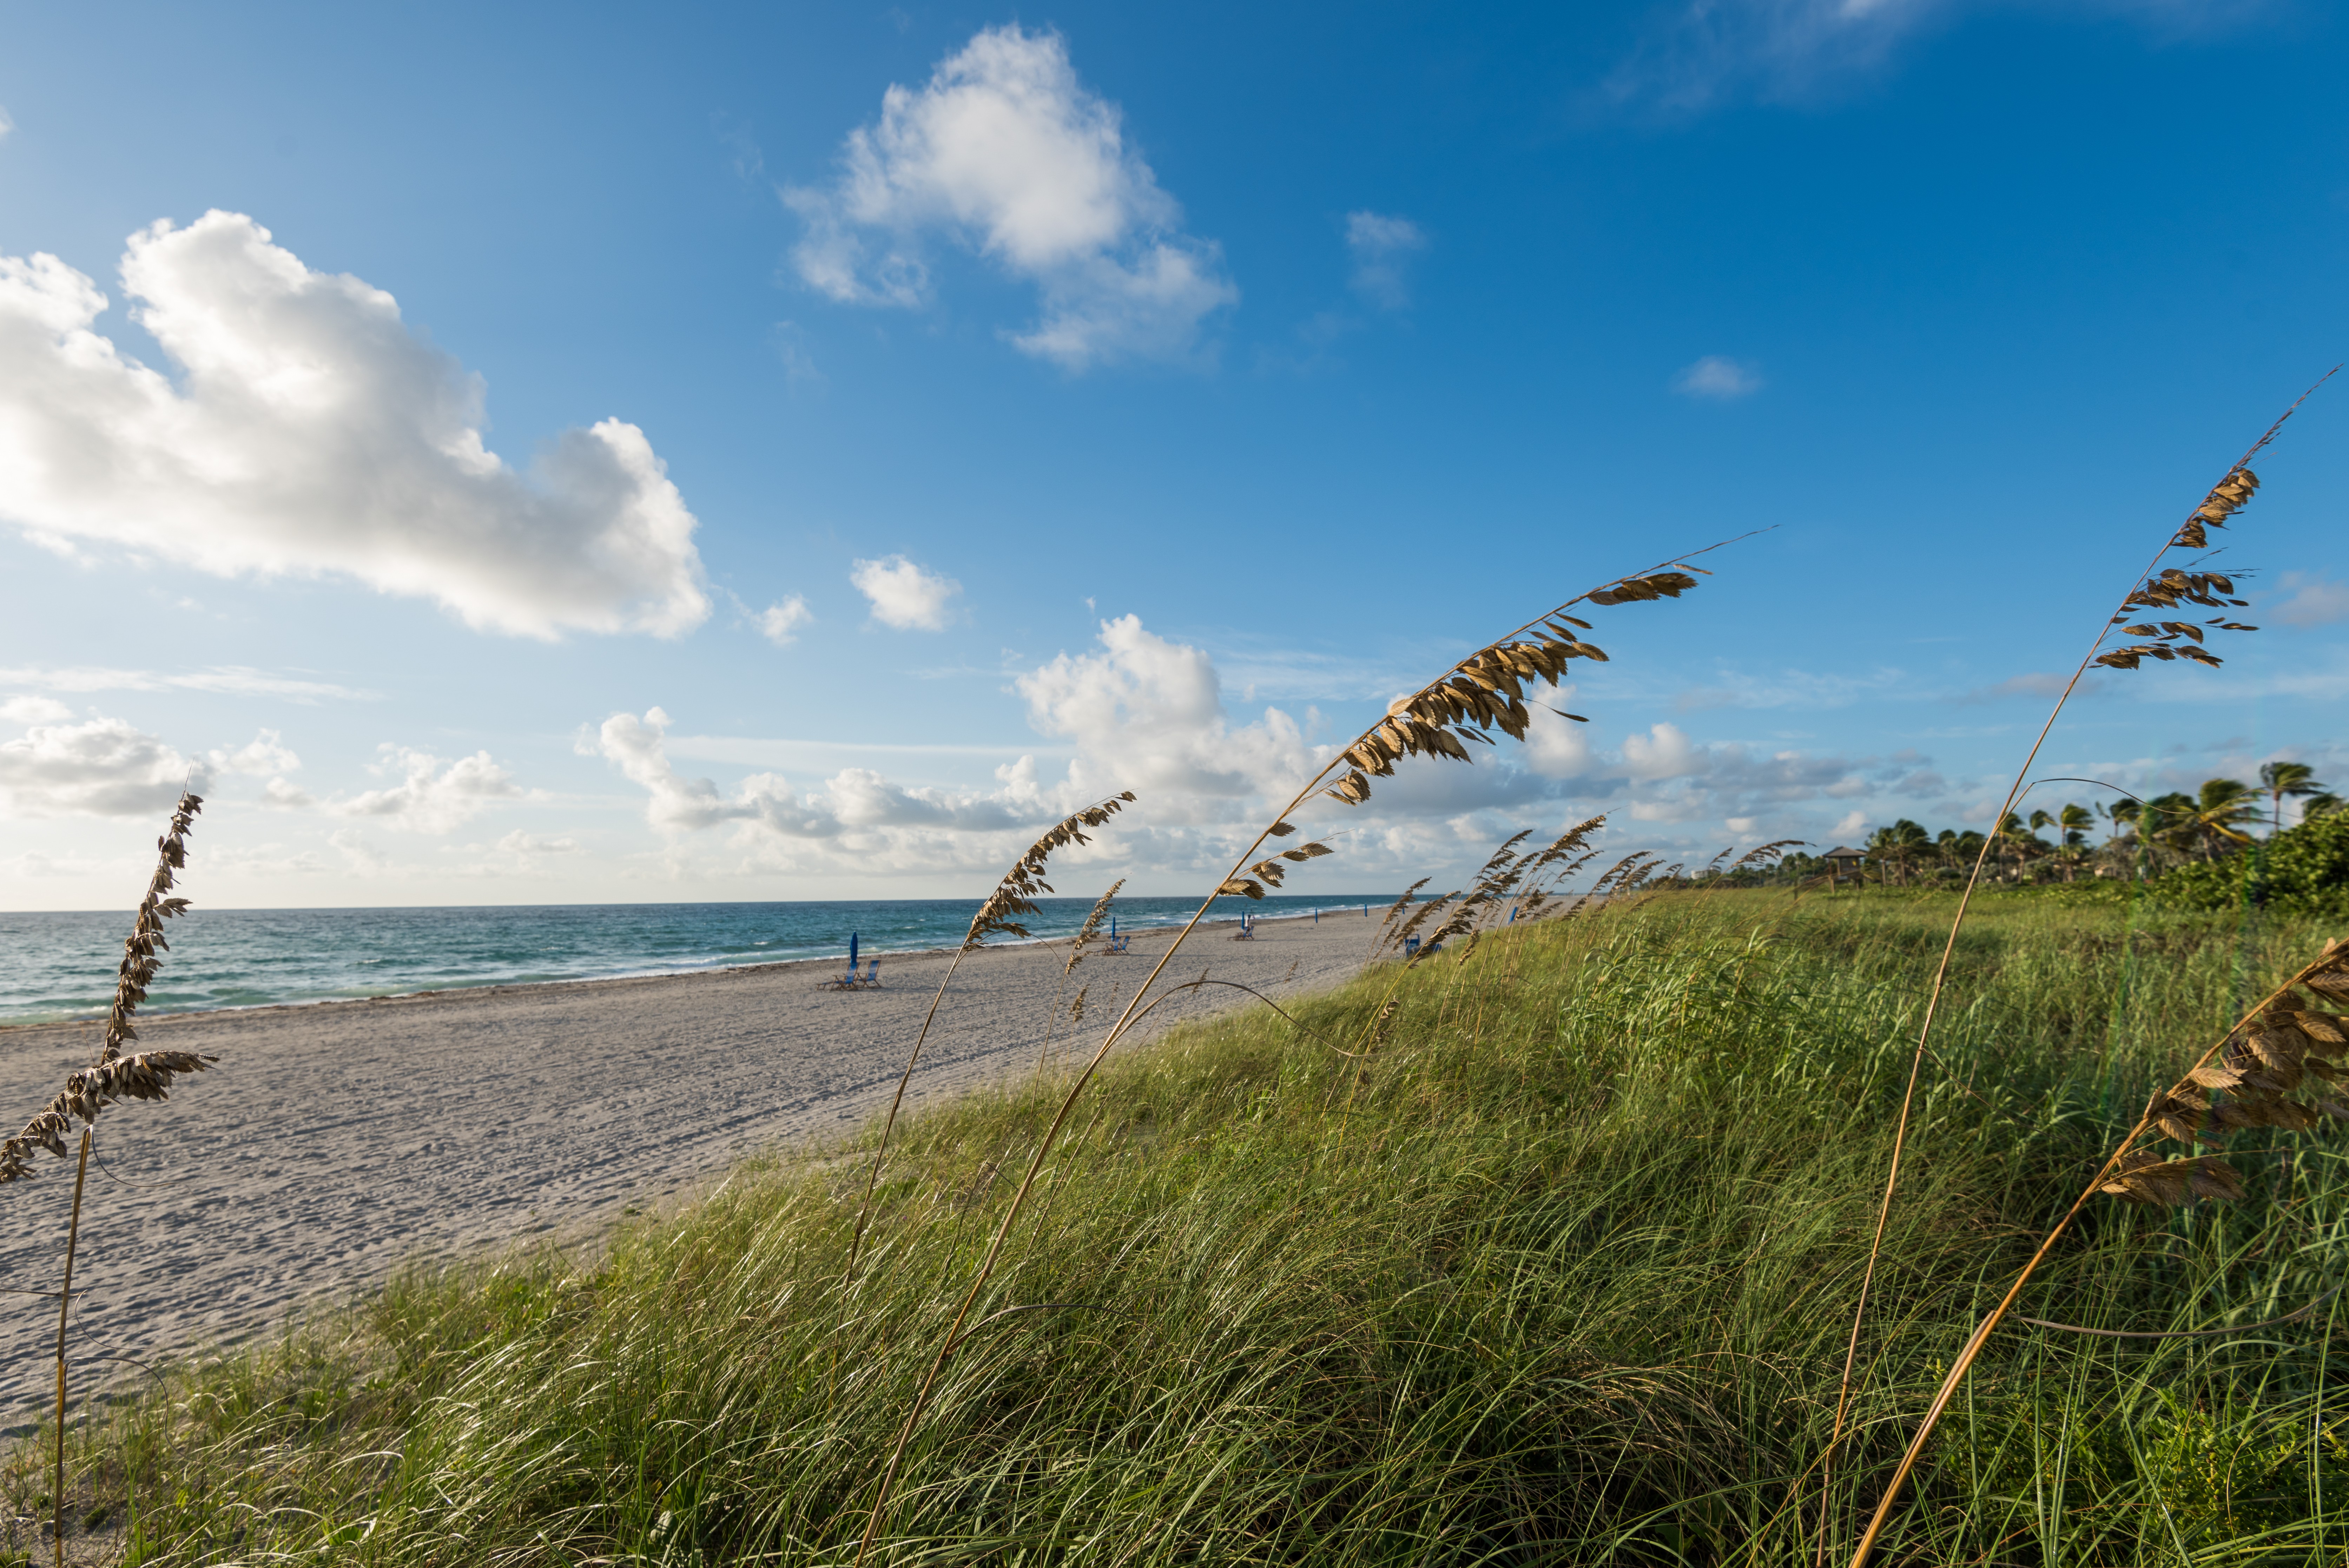 Delray Beach in Palm Beach, one of Florida's most popular beach destinations